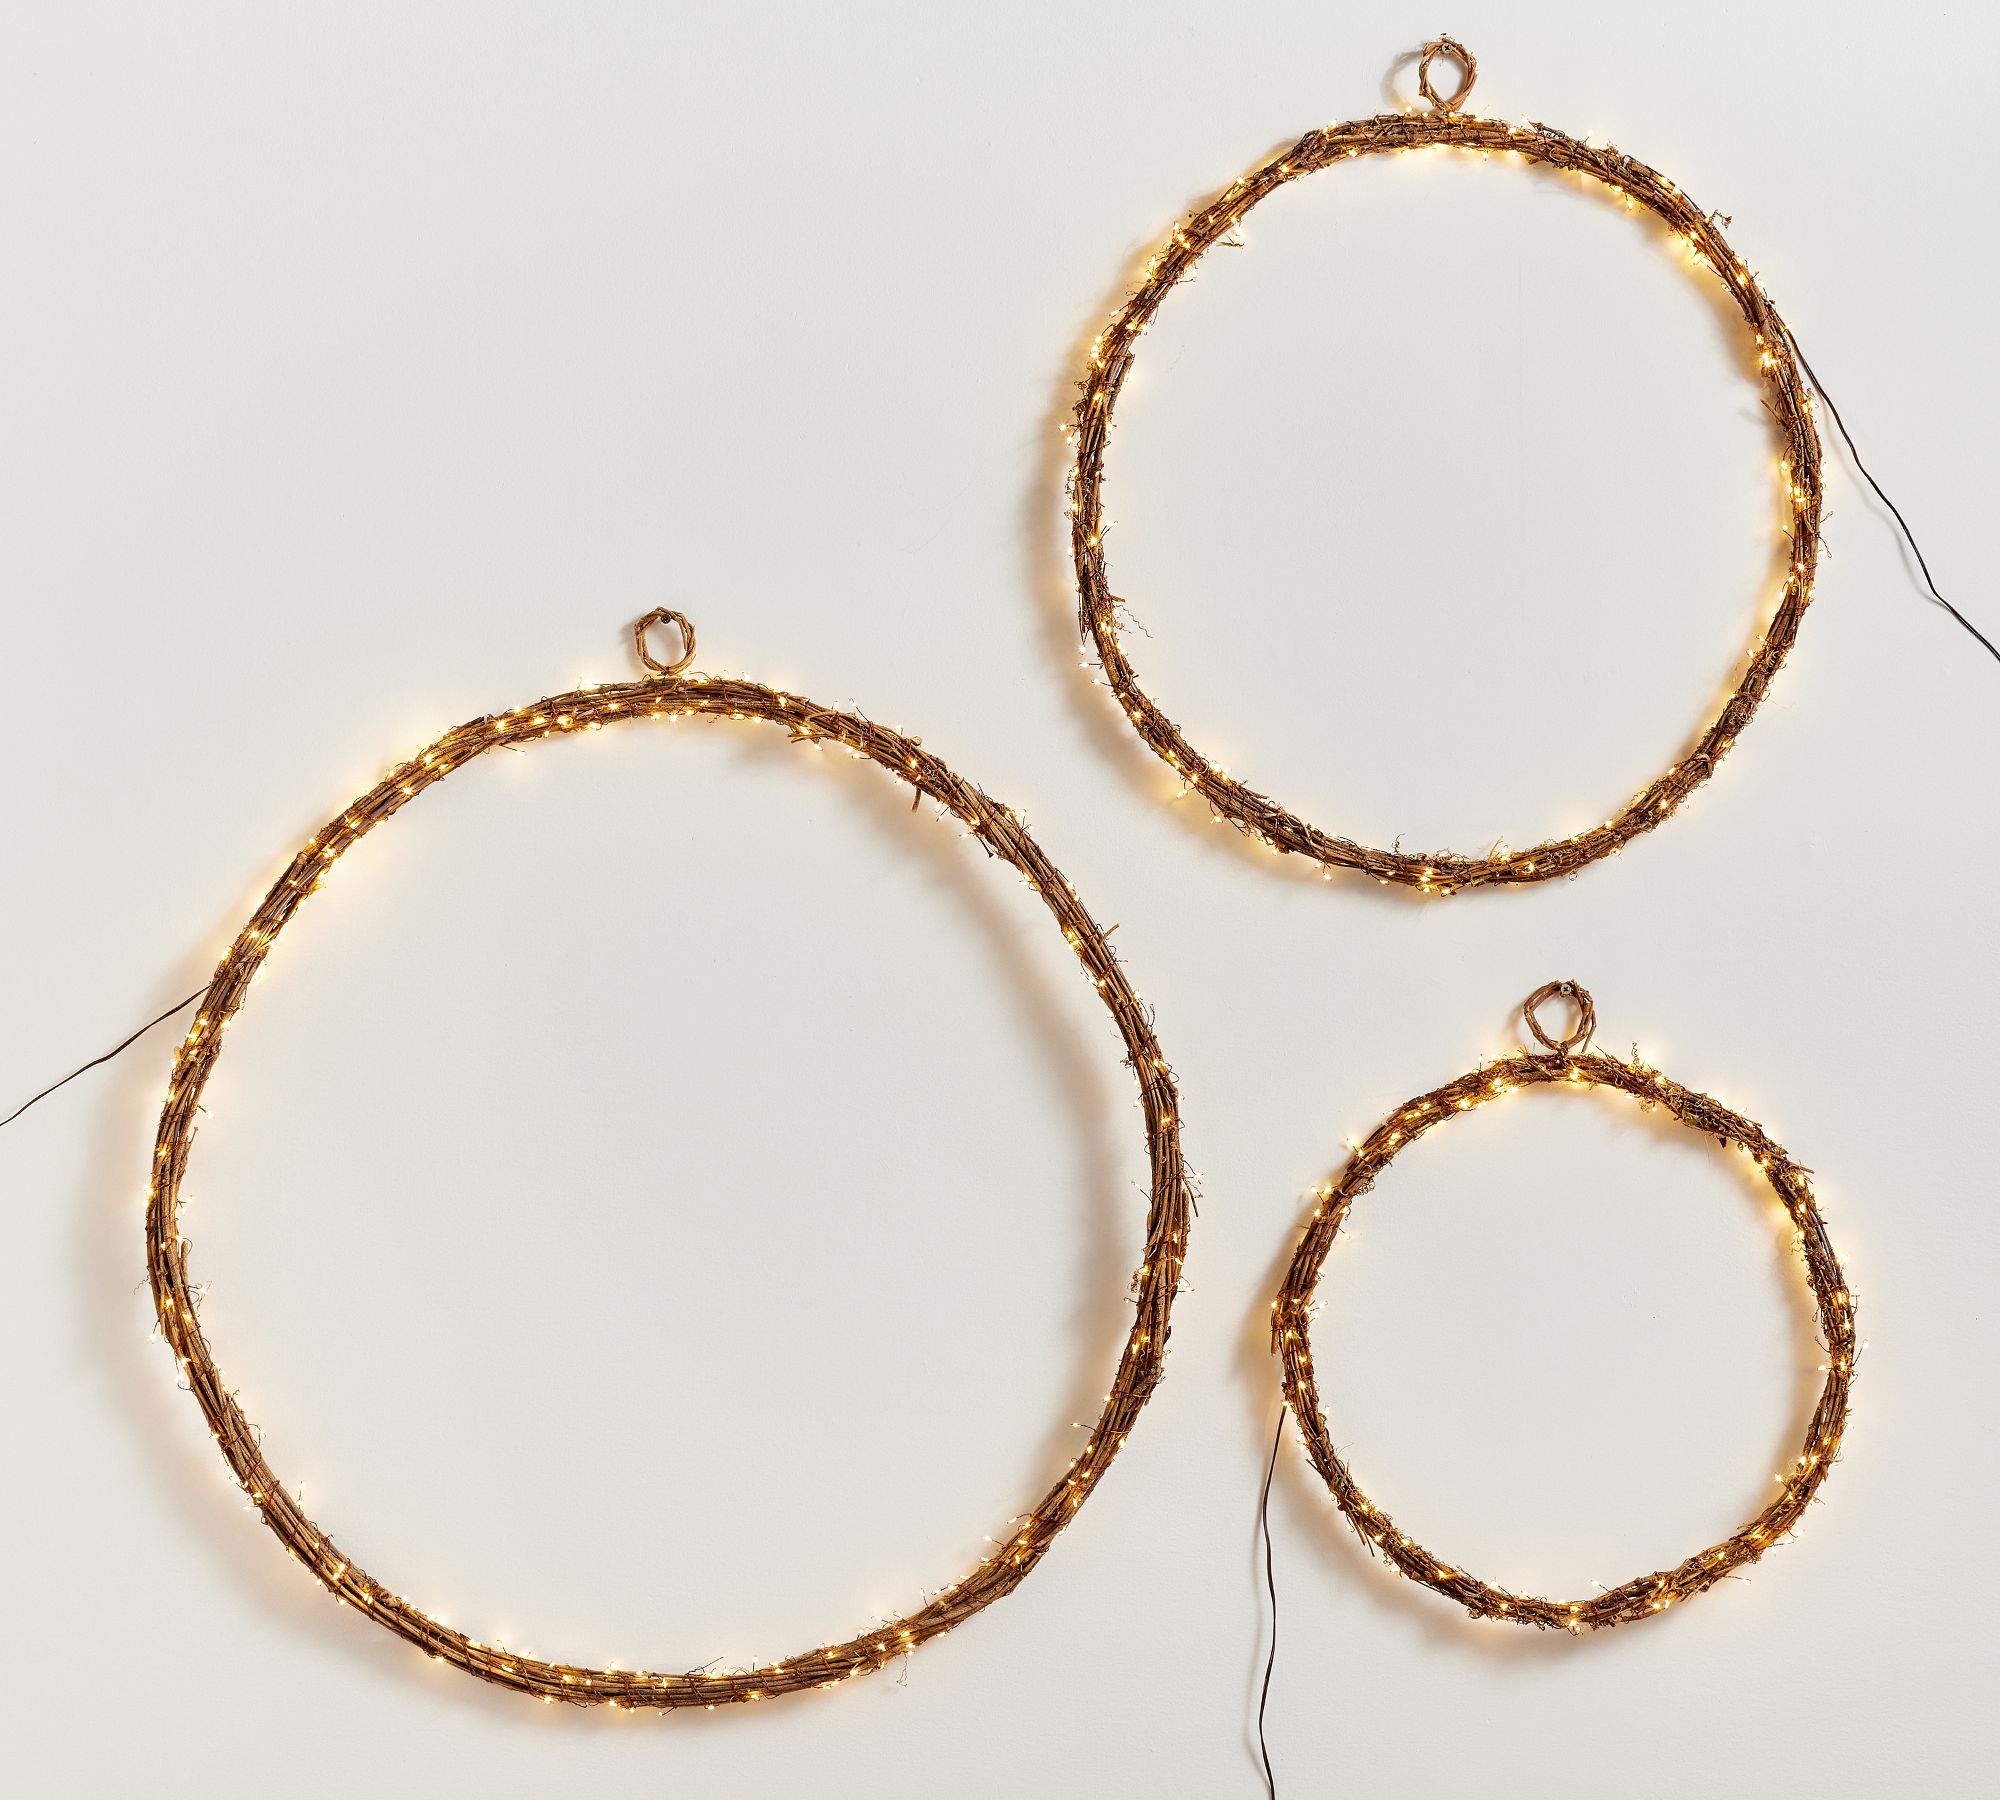 Handcrafted Rattan Rings with Twinkle Lights - Set of 3